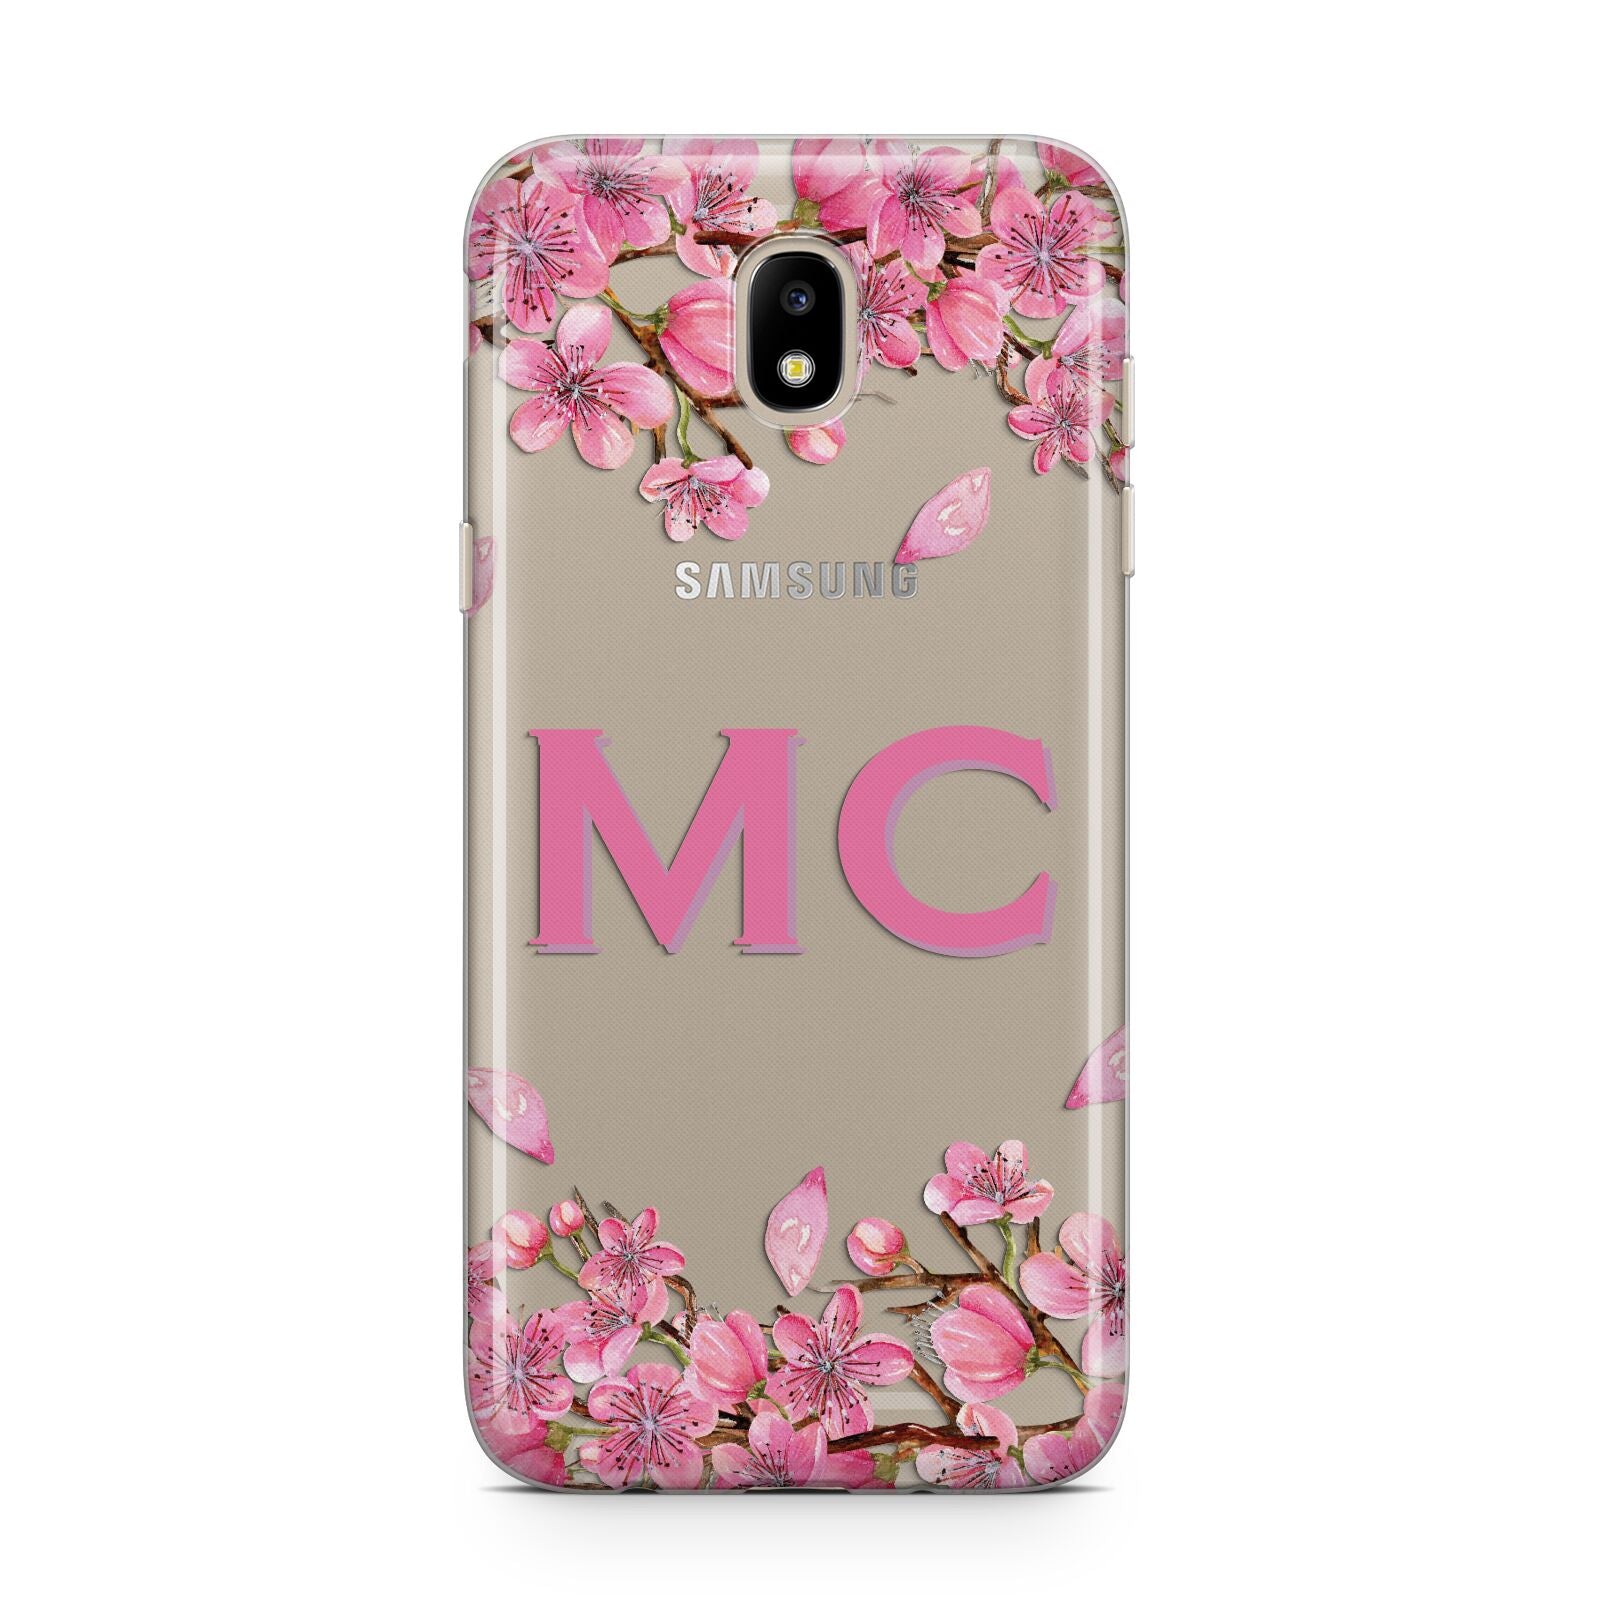 Personalised Vibrant Cherry Blossom Pink Samsung J5 2017 Case